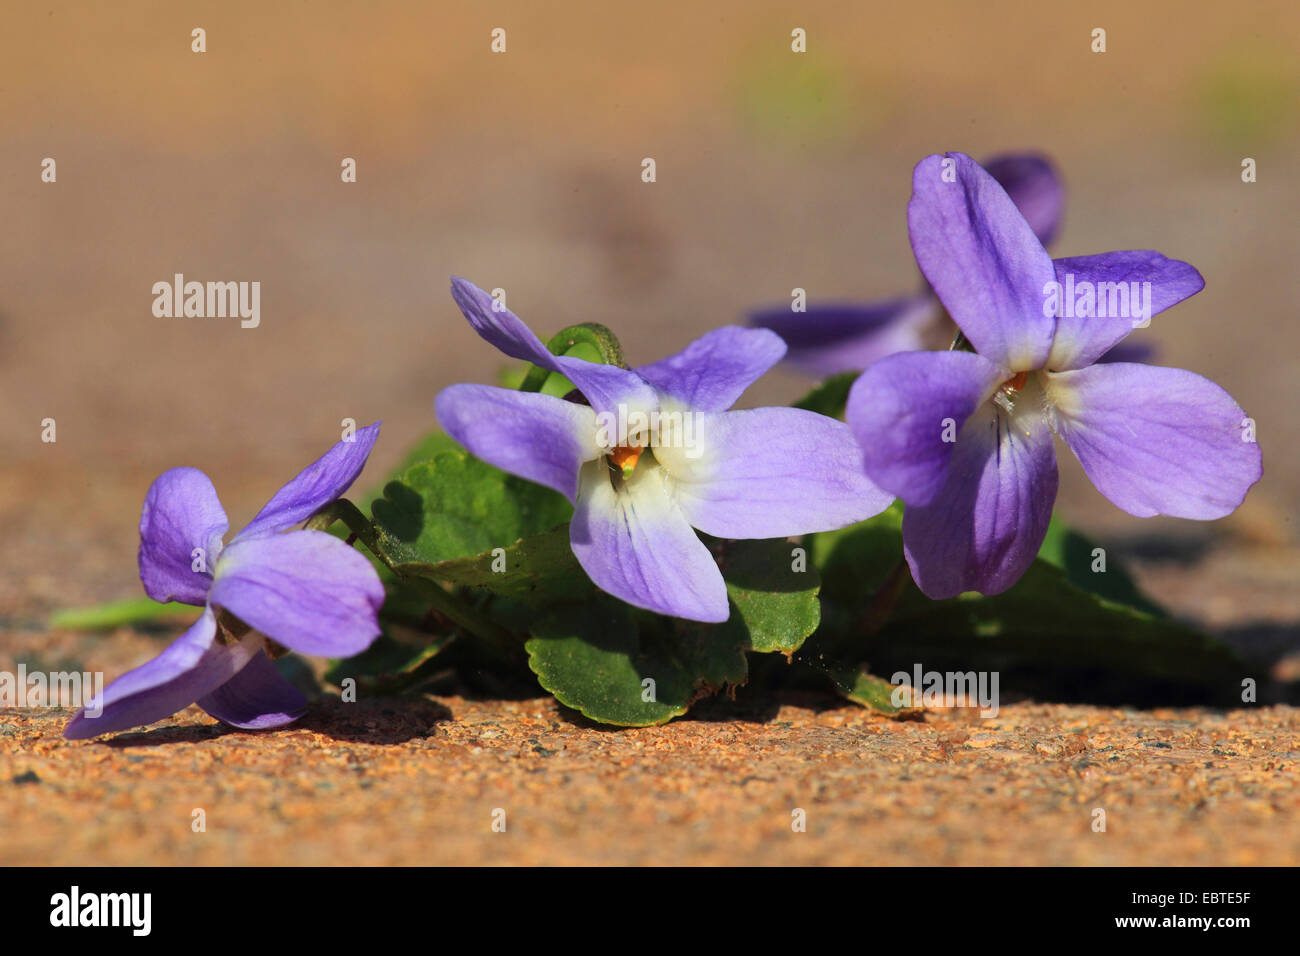 English violet, Sweet violet (Viola odorata), growing on a pavement, Germany Stock Photo